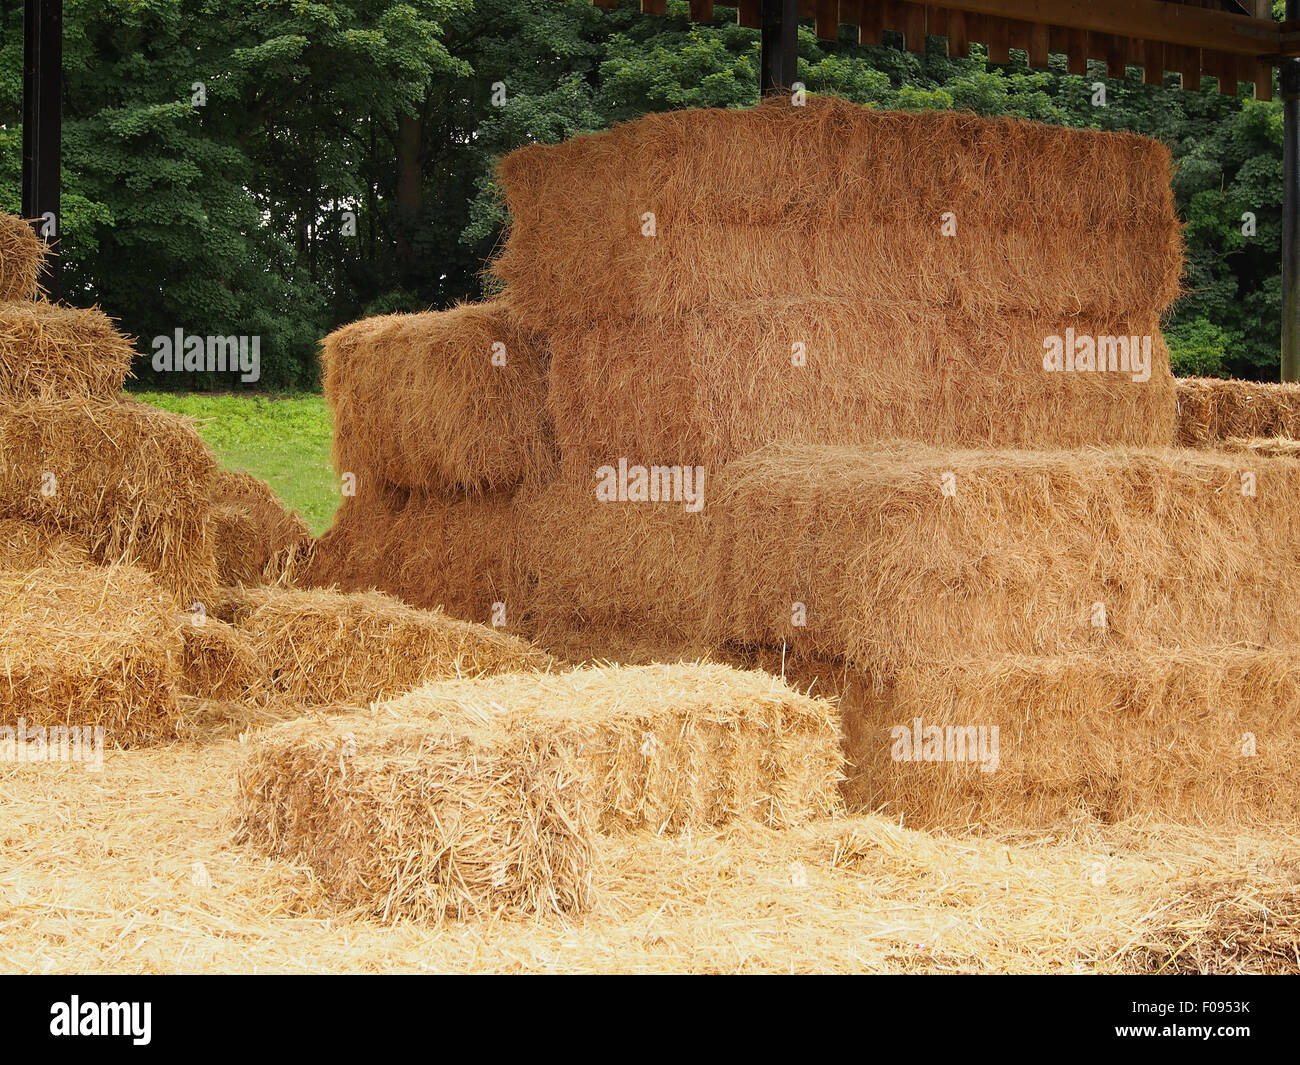 Traditional rectangular hay bales being stored for farm animal forage in a traditional barn in Cheshire, England, UK. Stock Photo